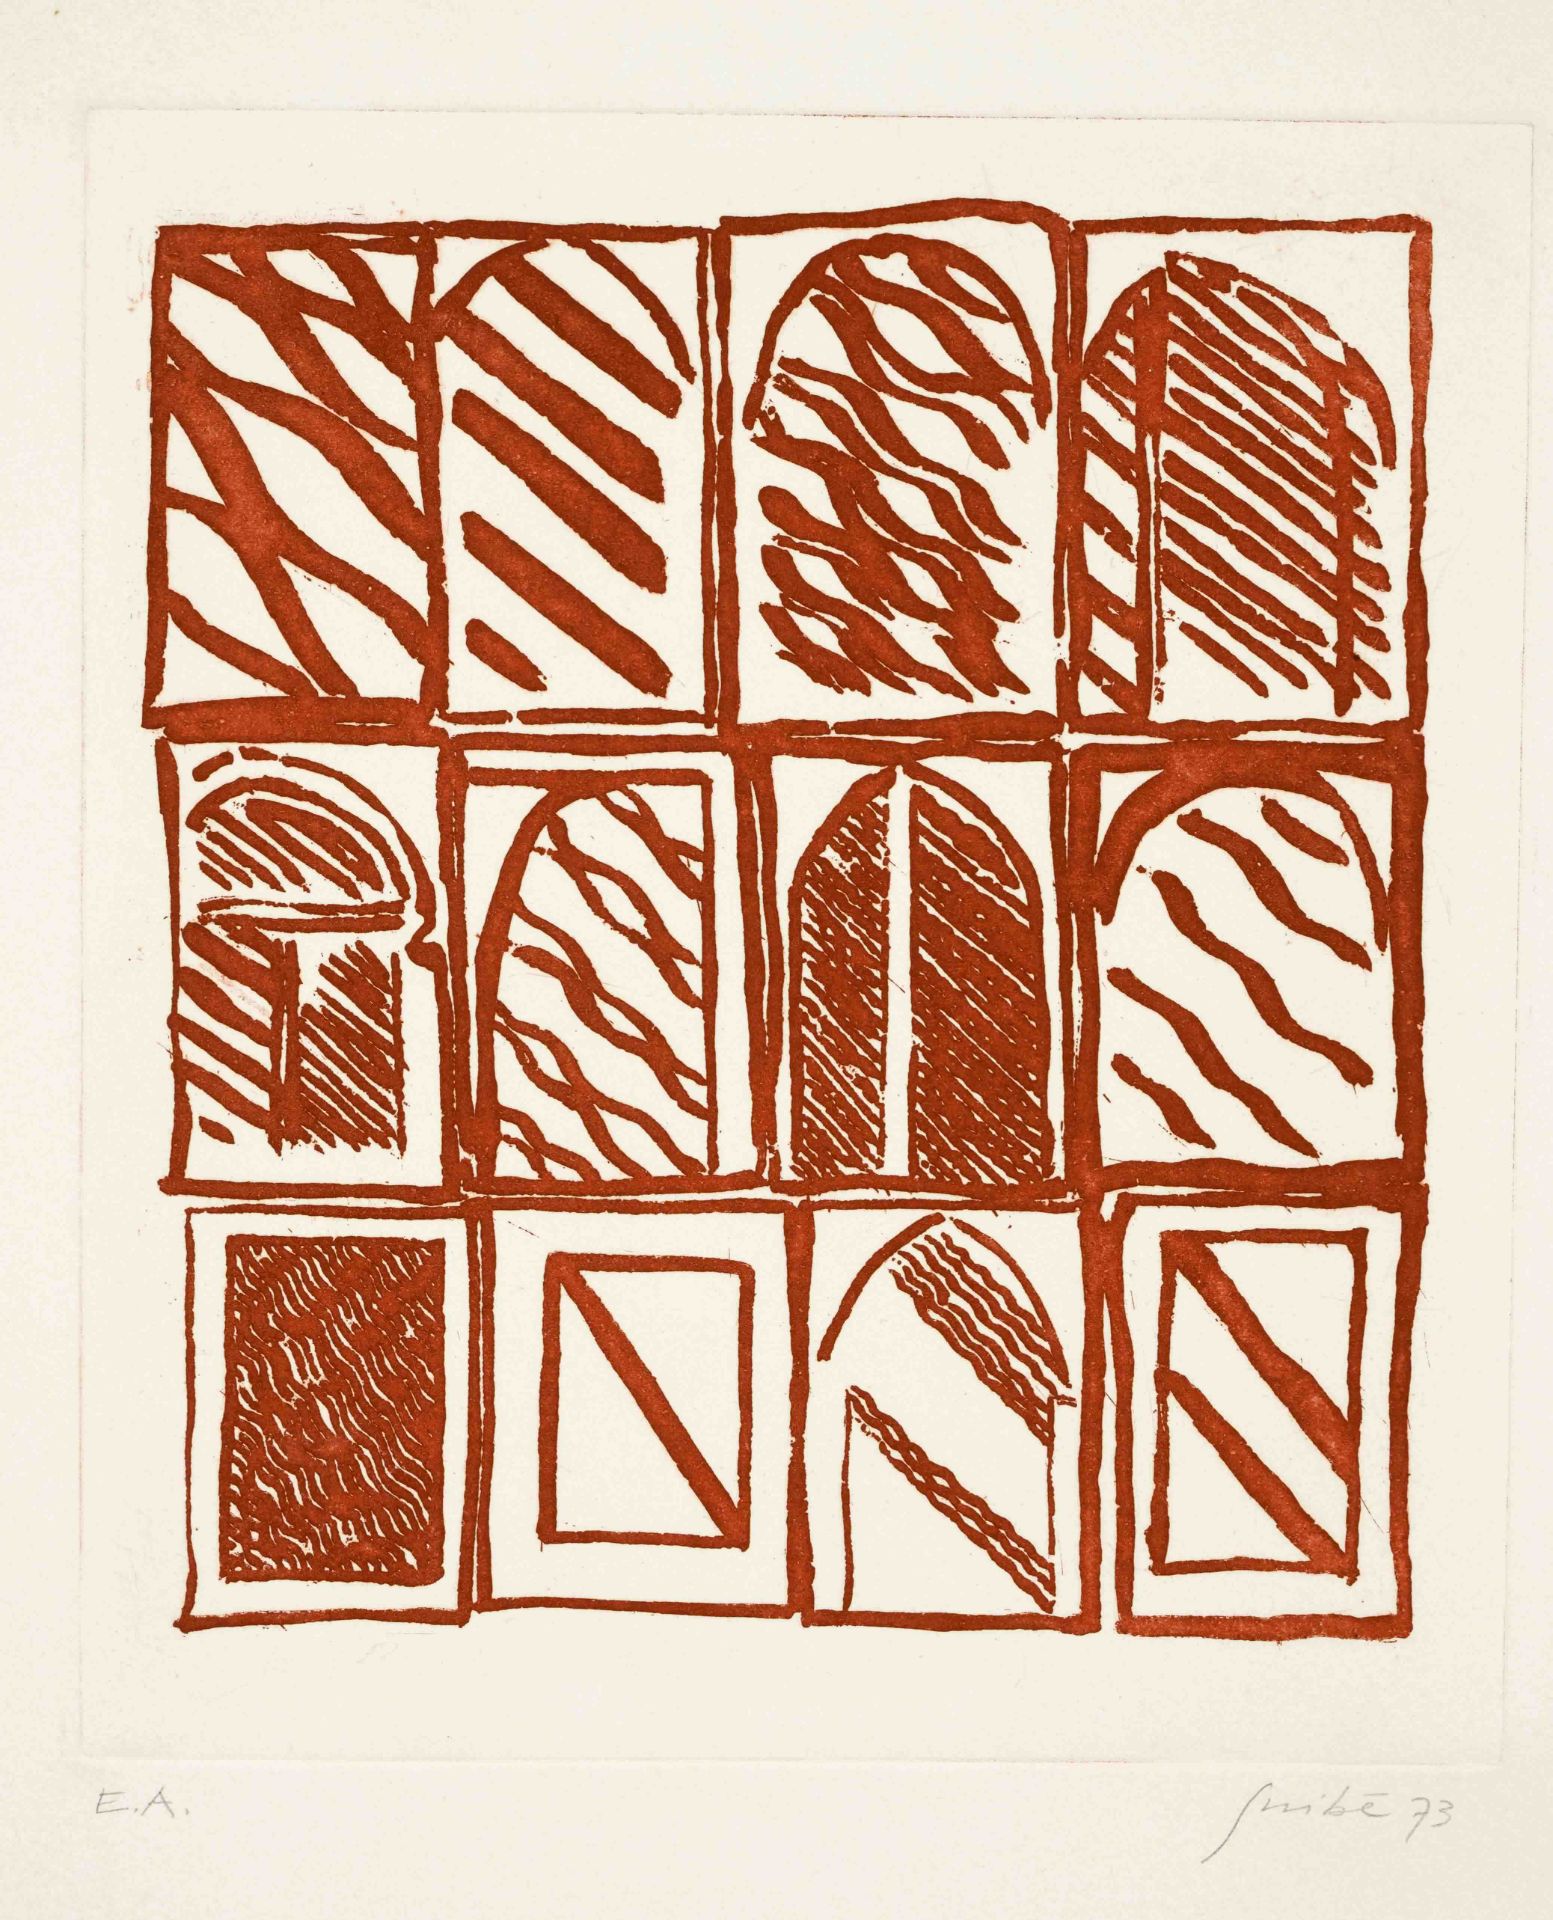 Unknown artist c. 1970, bundle of 6 aquatint etchings with abstract motifs, each indistinctly signed - Image 6 of 6